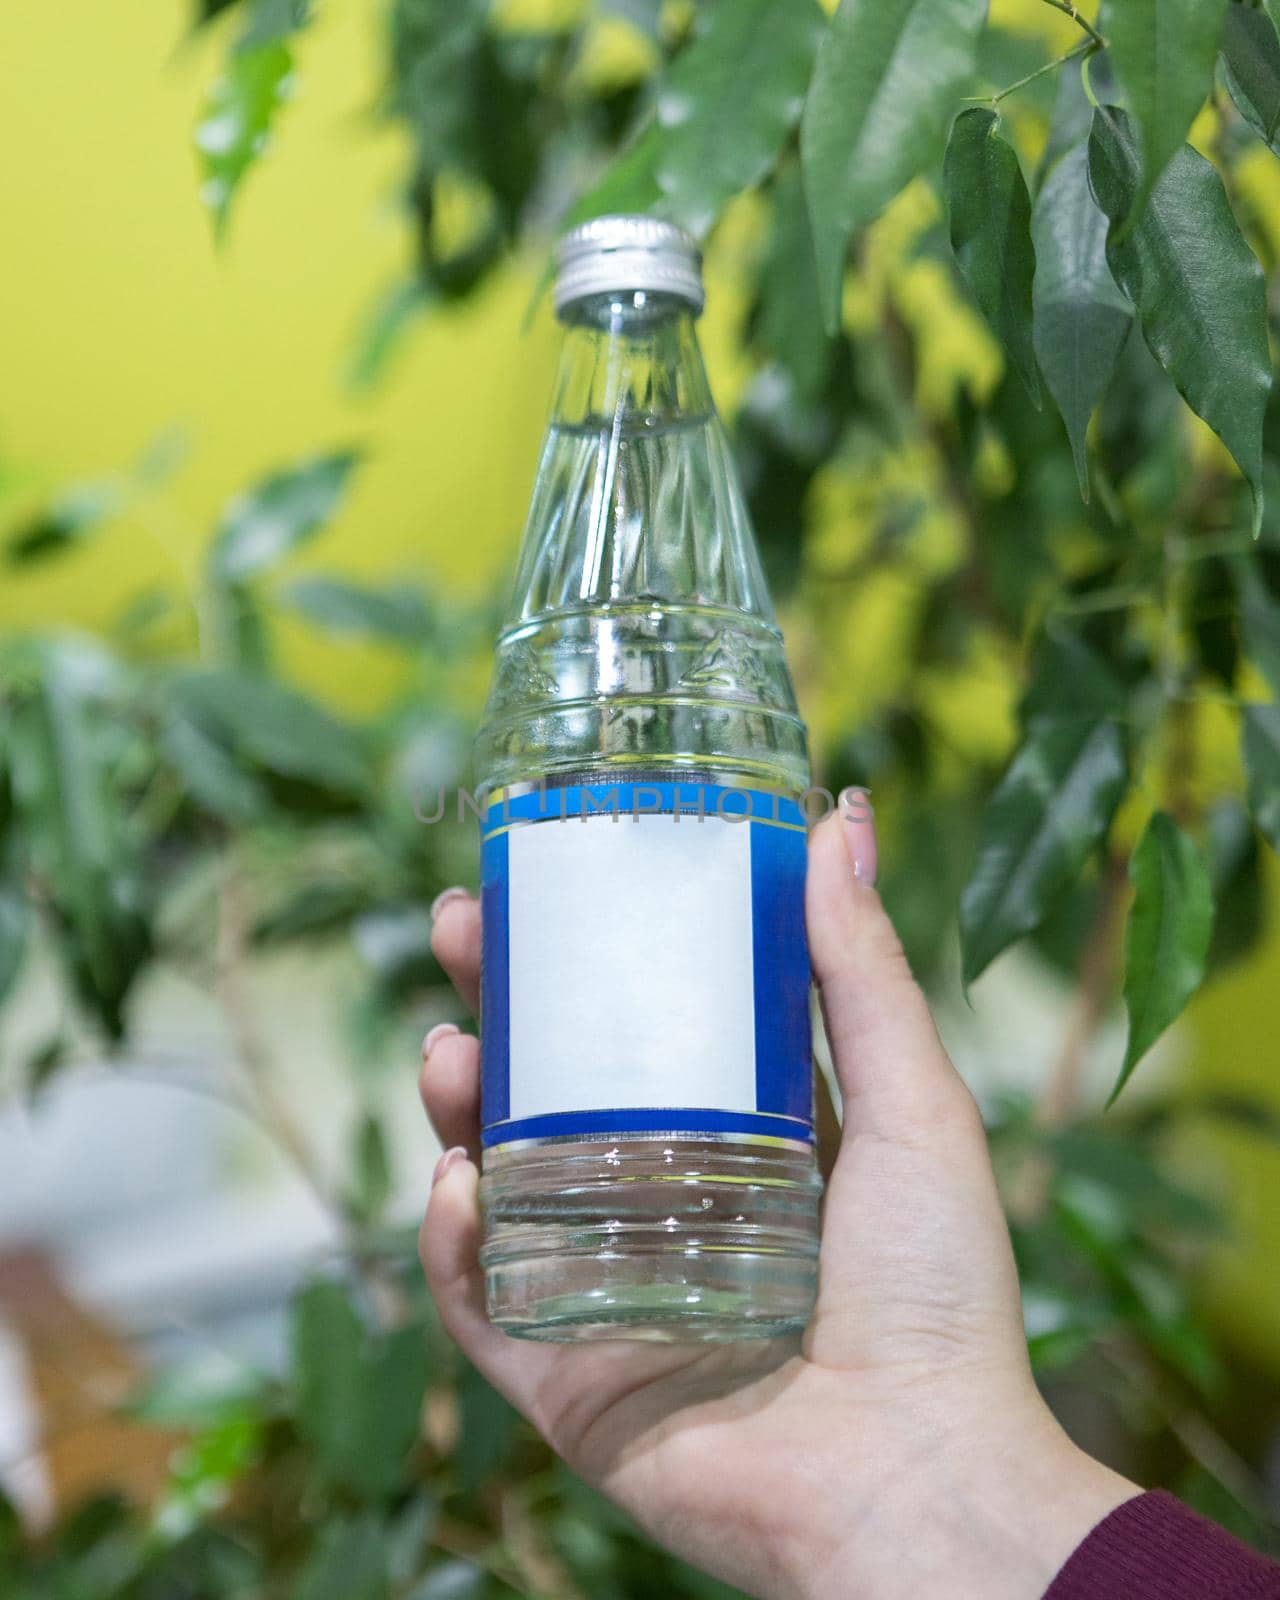 Holding a glass water bottle with green background